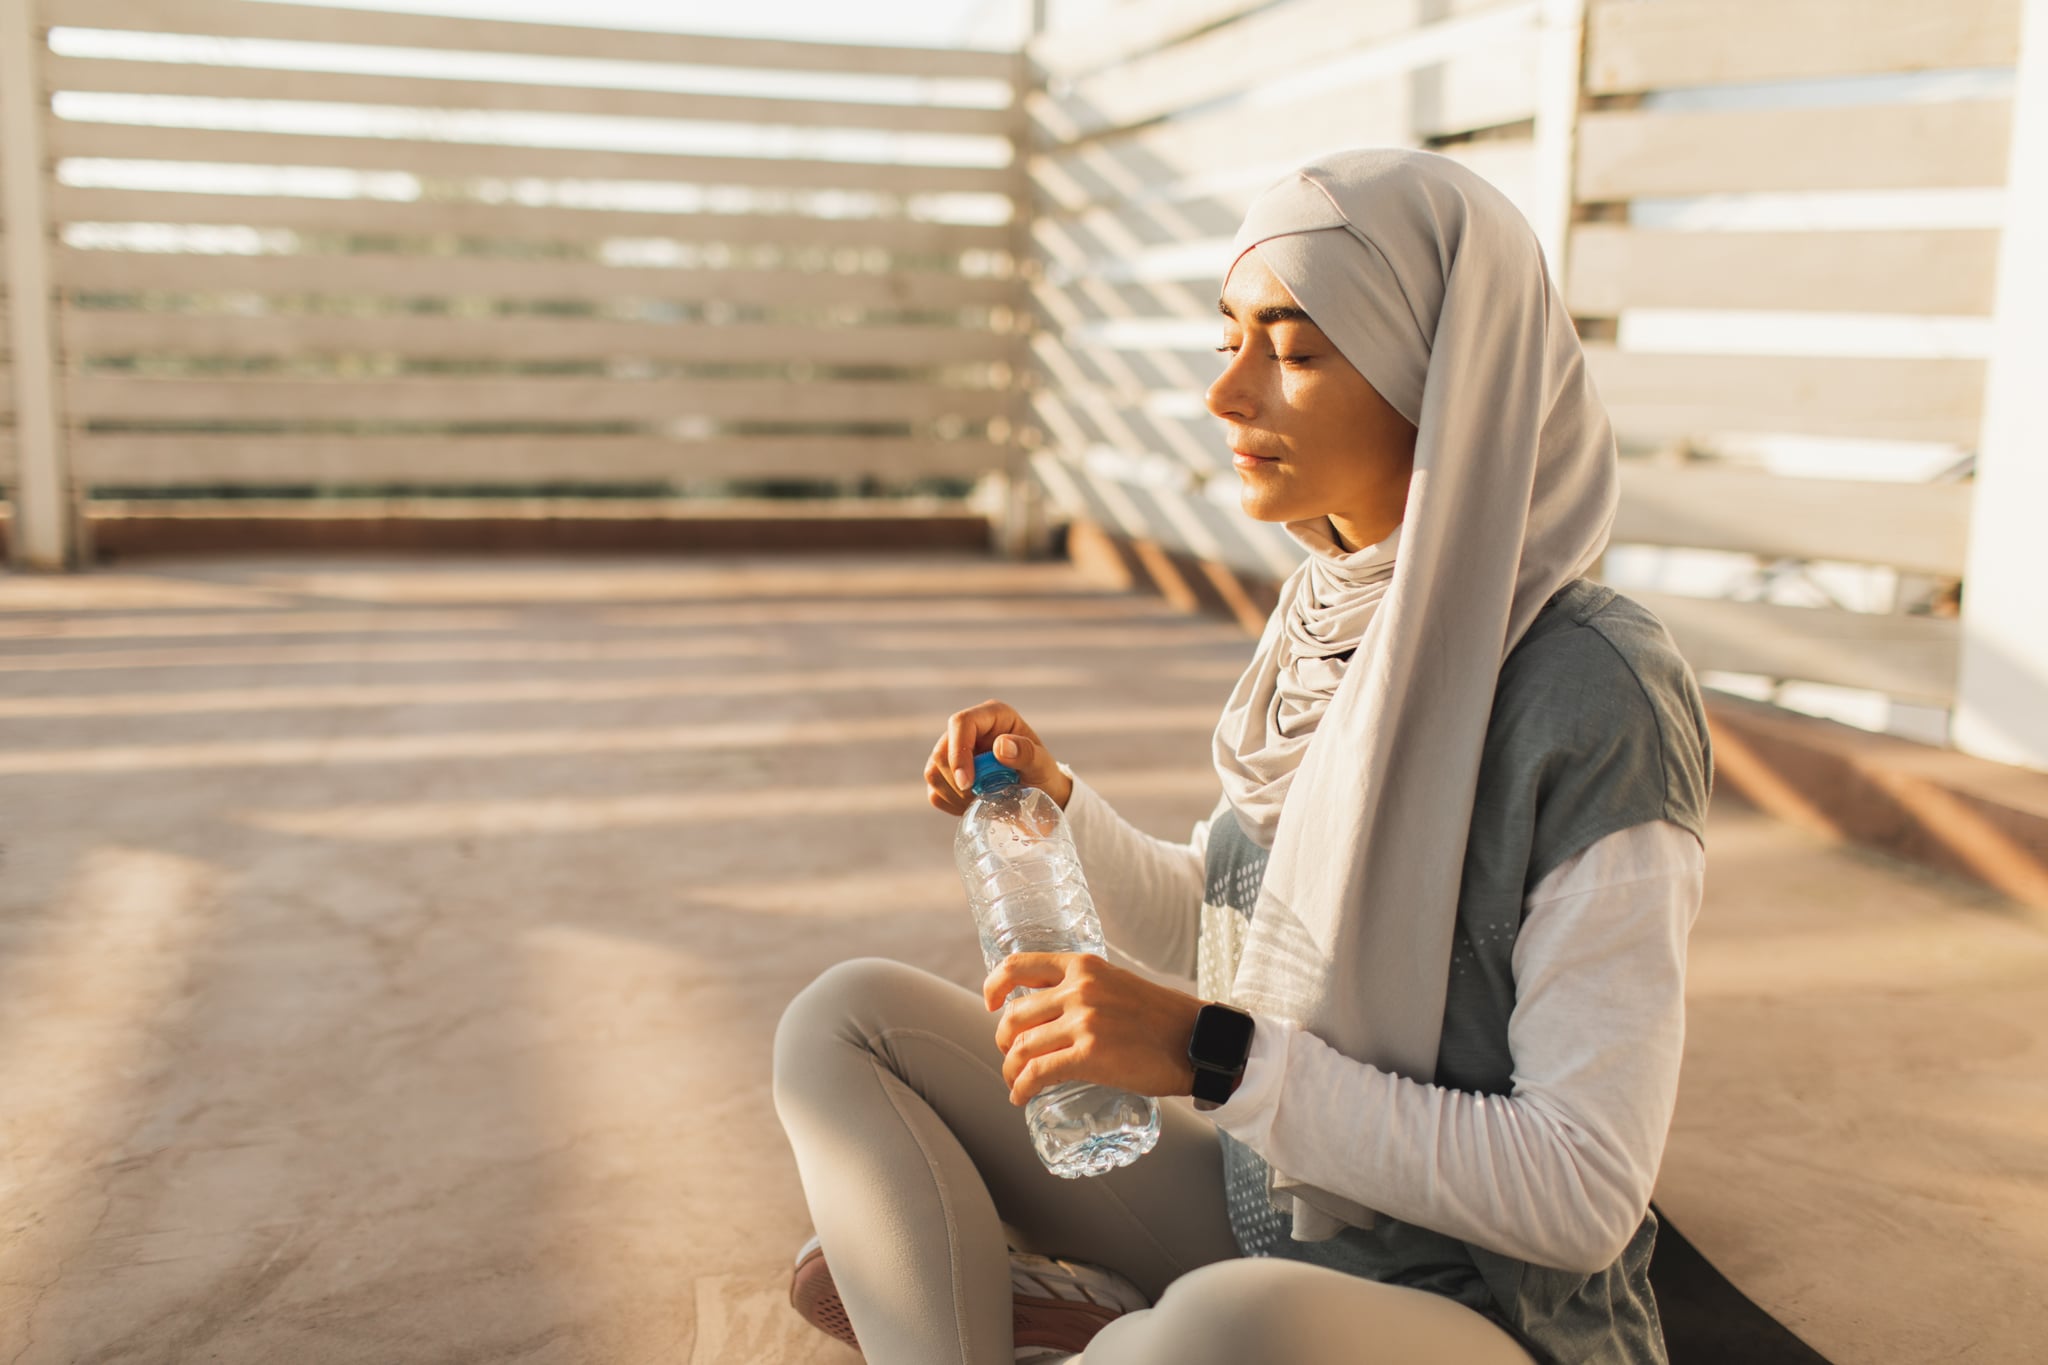 Healthy and active lifestyle of muslim girl in hijab wondering if she can drink water during ramadan. Training outdoors. Drinking water in plastic bottle. Hydration in sport.